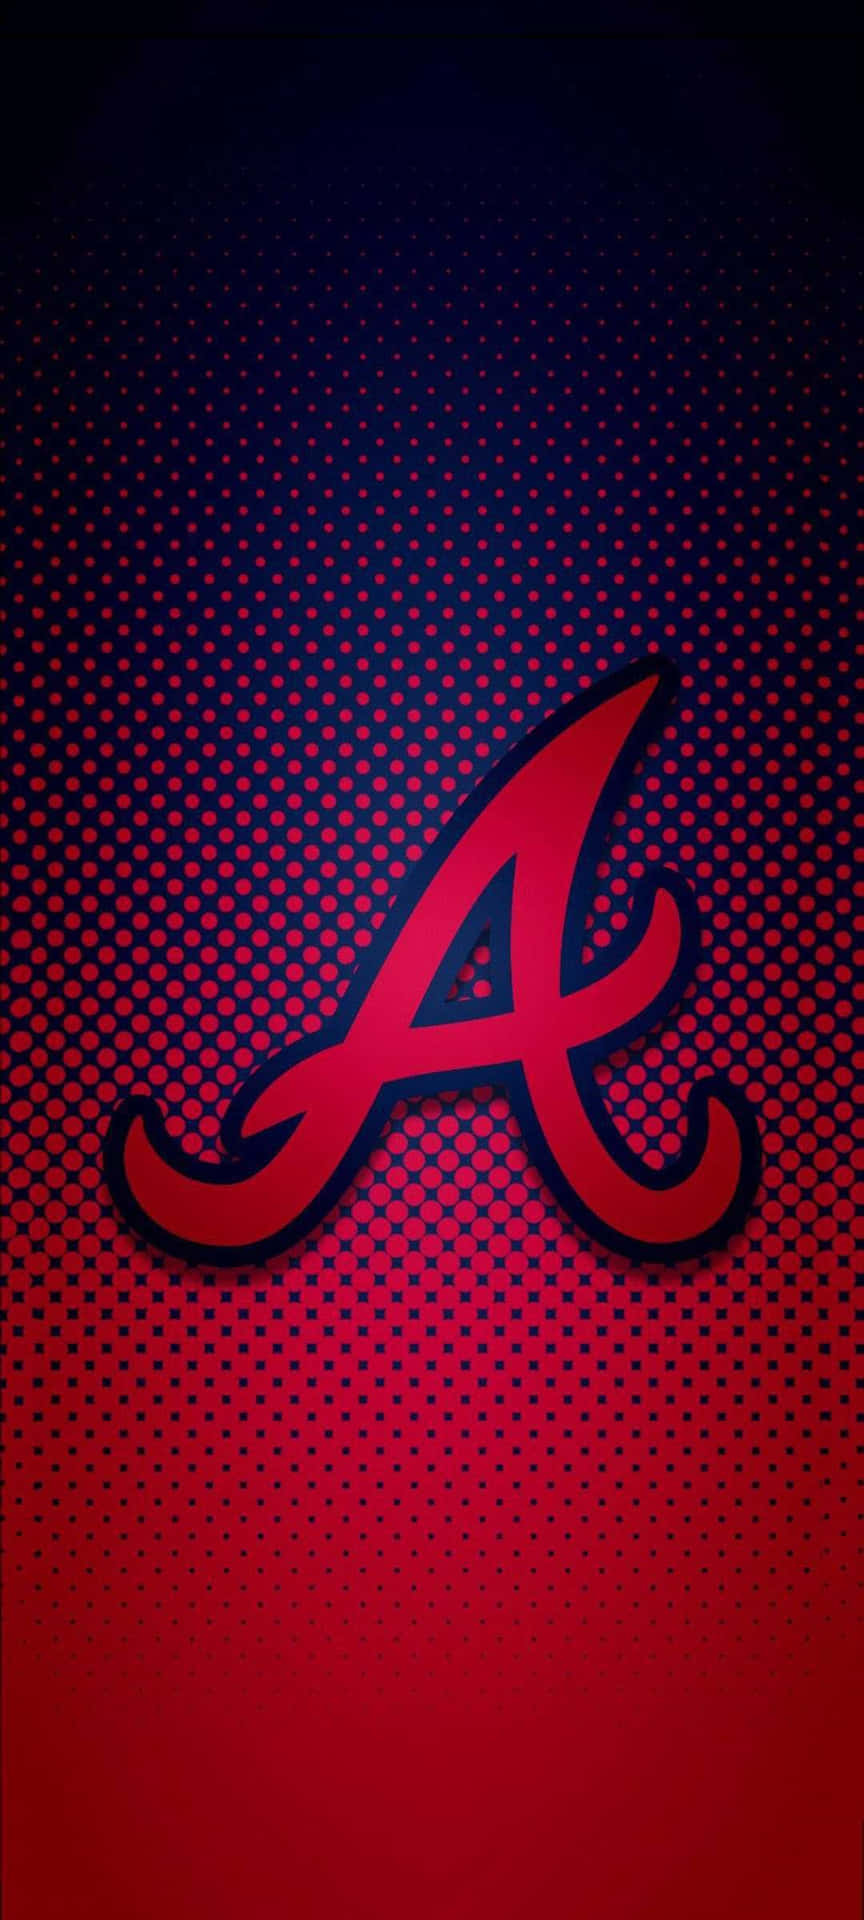 Get Ready For The Braves' Next Game With Your Atlanta Braves iPhone Wallpaper